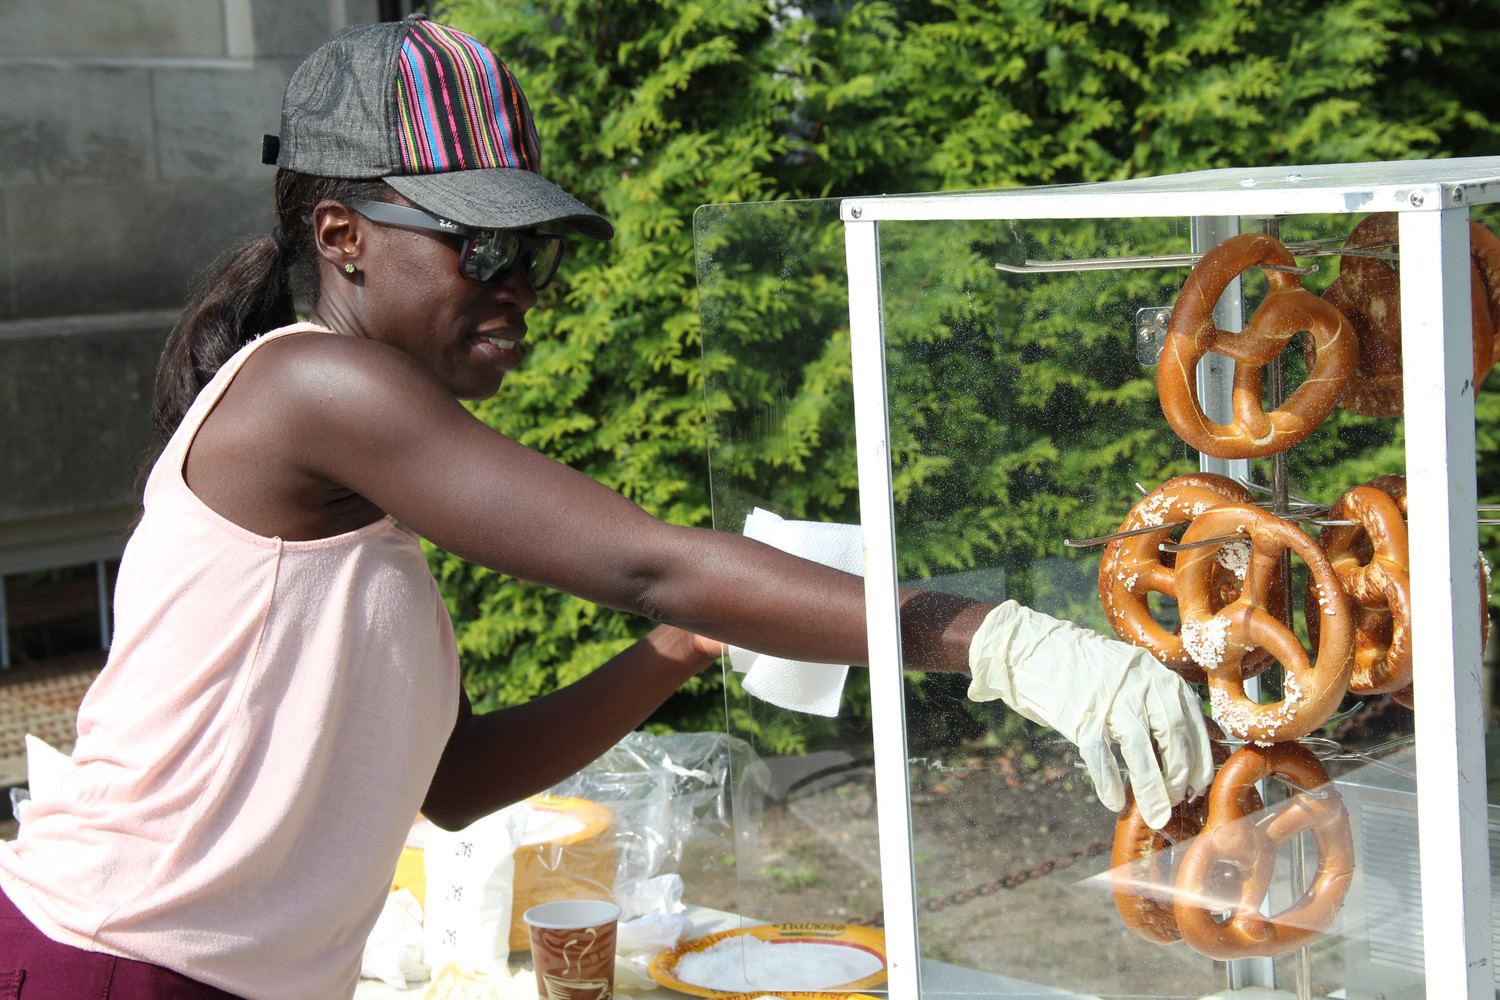 Librarian Michelle Samuel handed out the soft pretzels for attendees during festival.